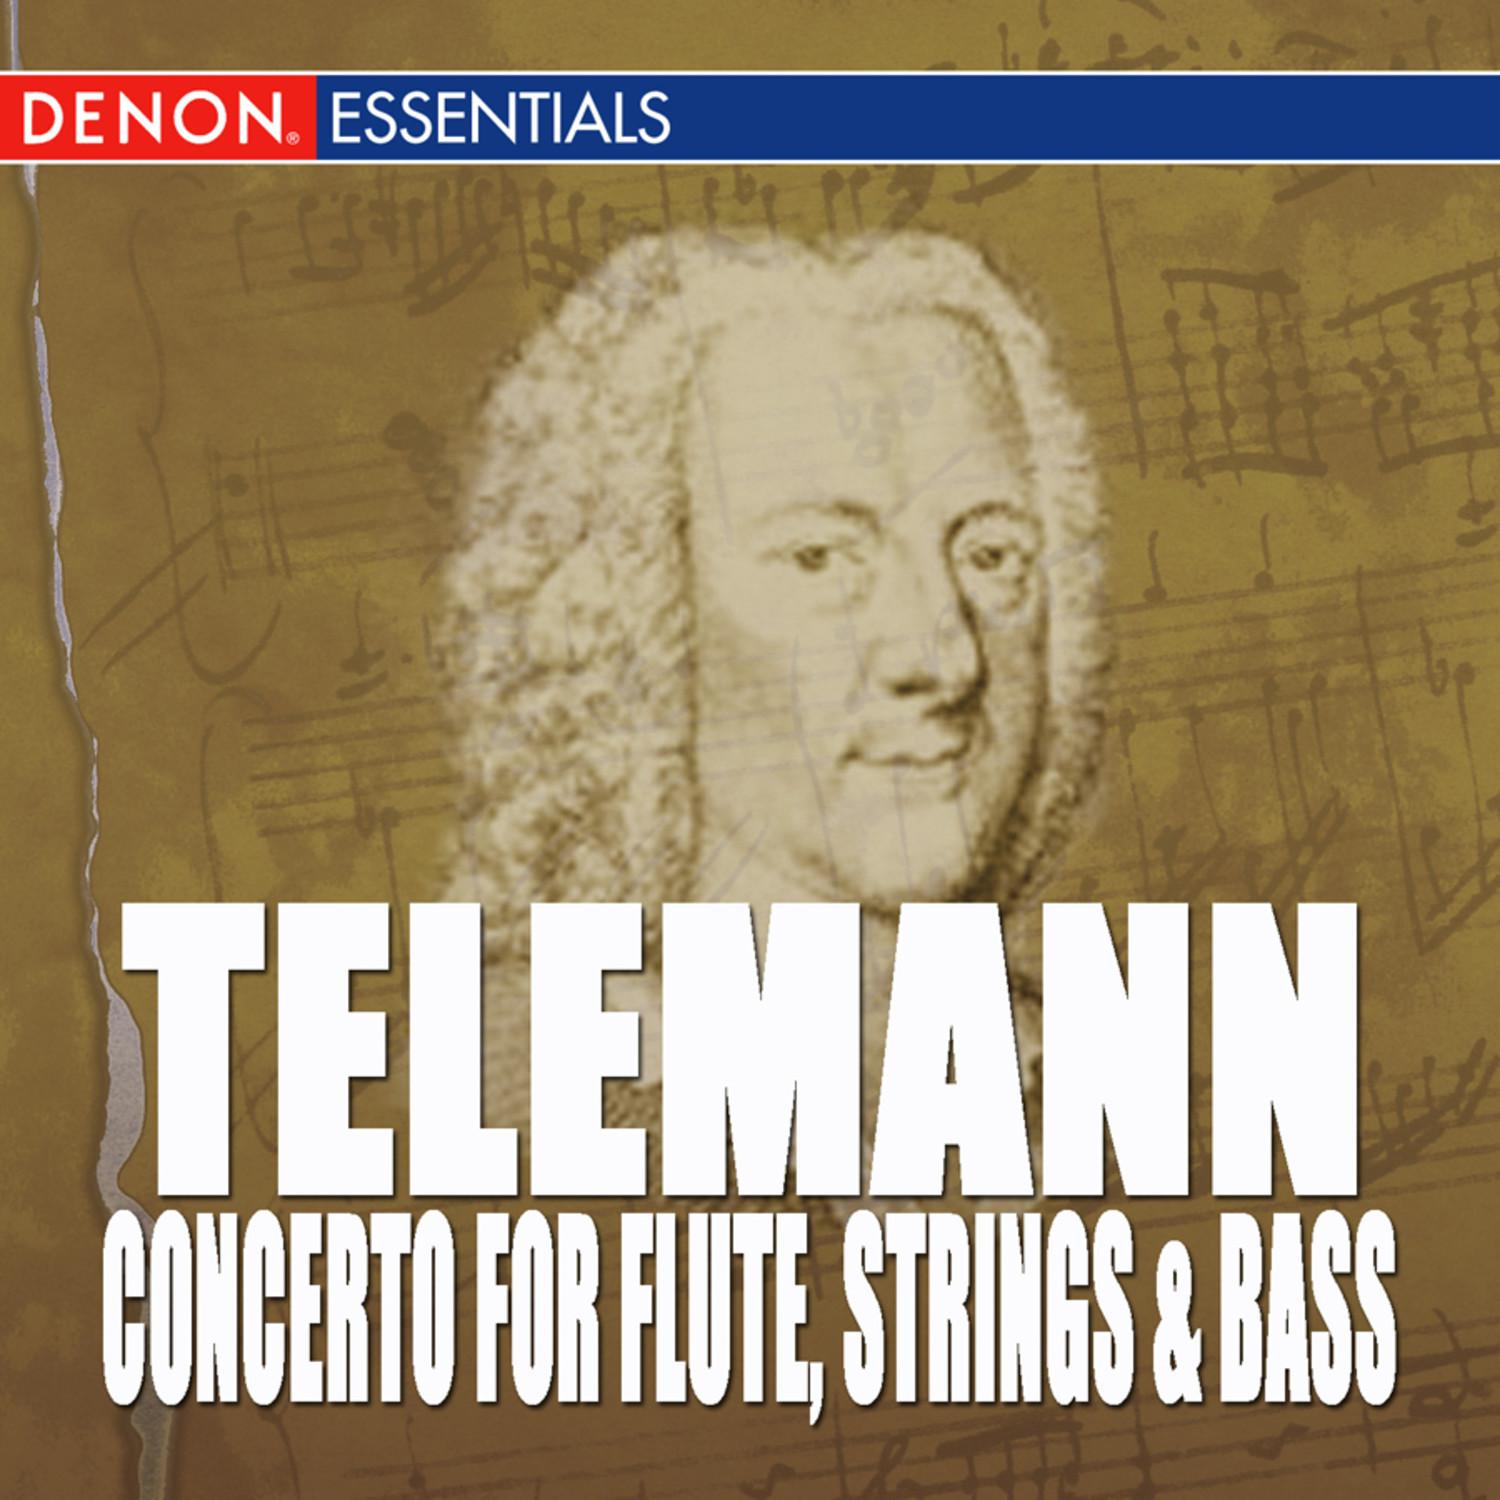 Concerto for Horn, Strings & Basso Continuo: I. Allegro